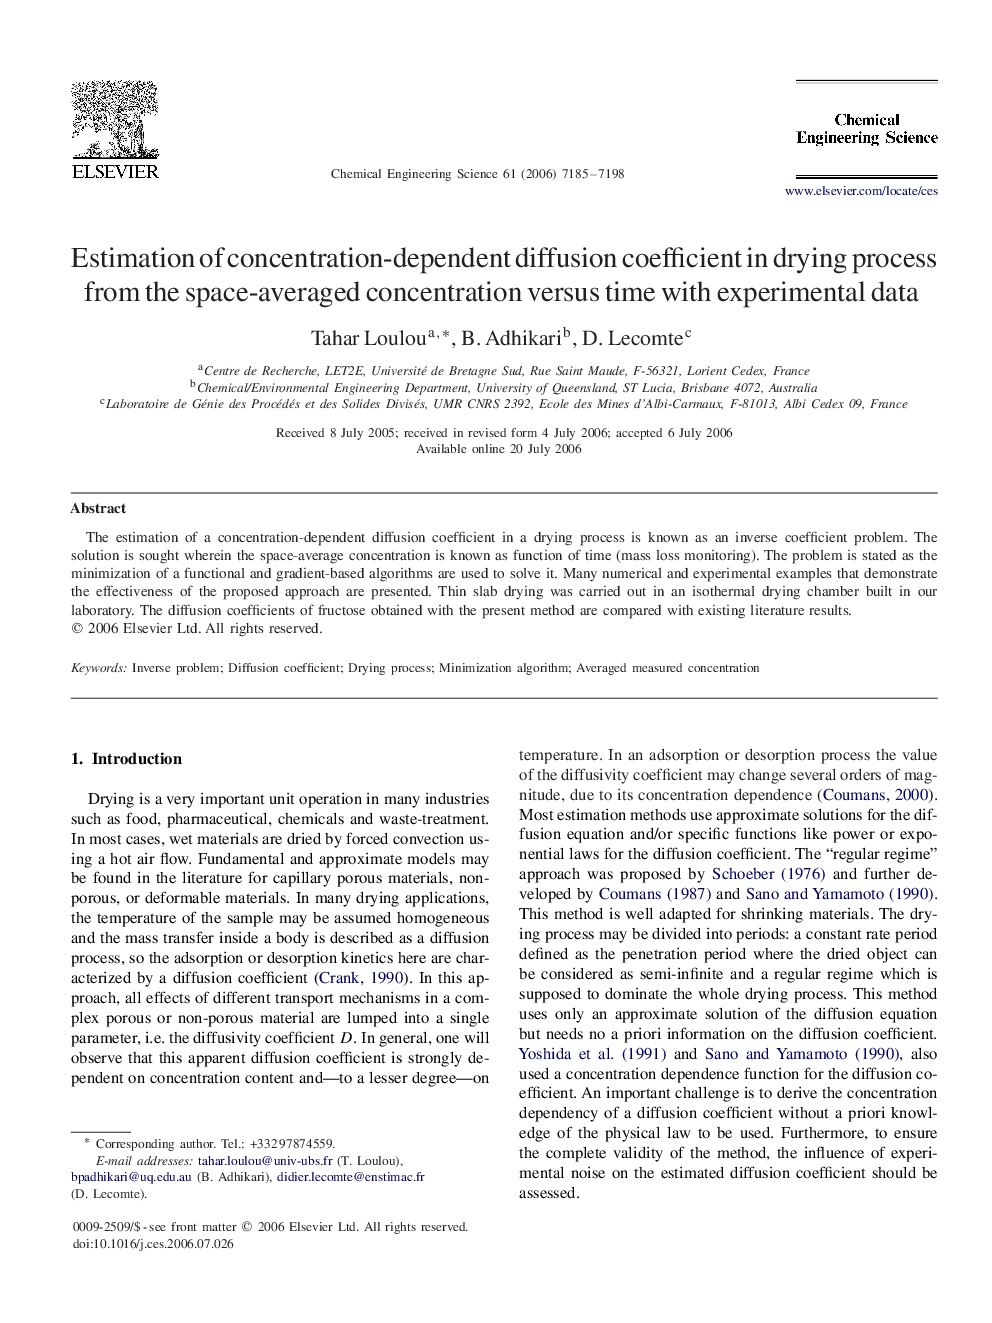 Estimation of concentration-dependent diffusion coefficient in drying process from the space-averaged concentration versus time with experimental data